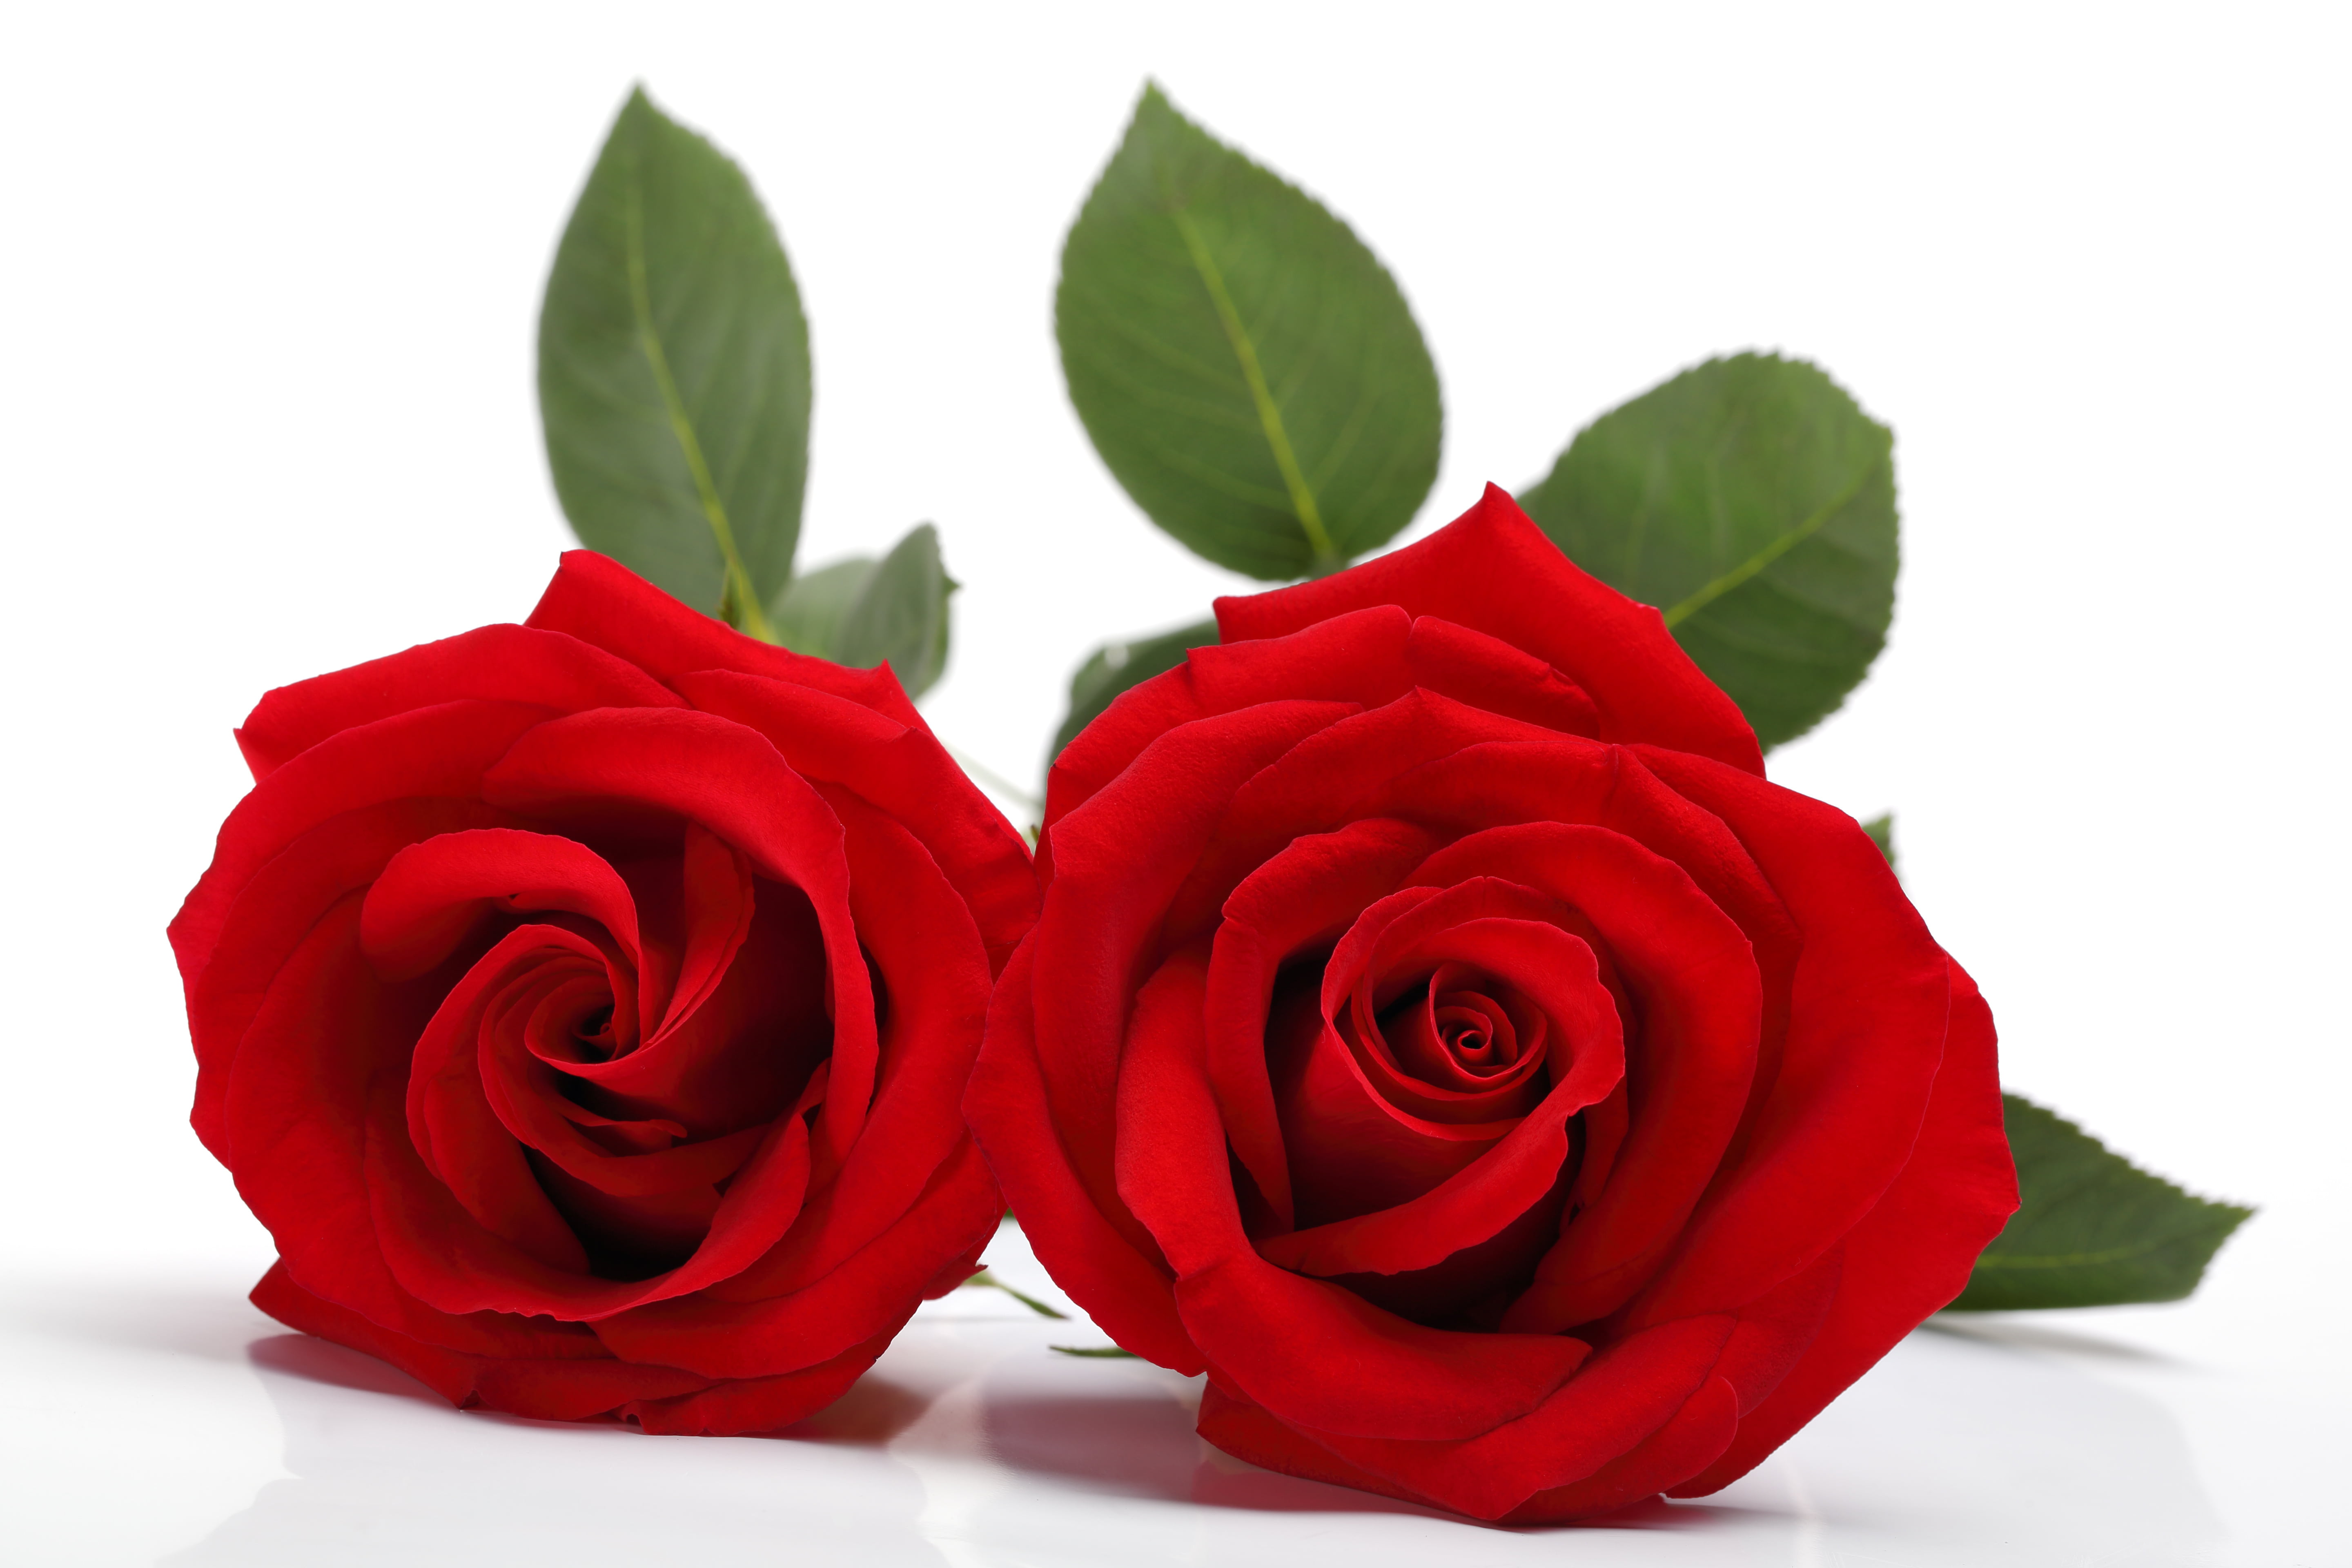 Two Red Roses Hd Wallpaper